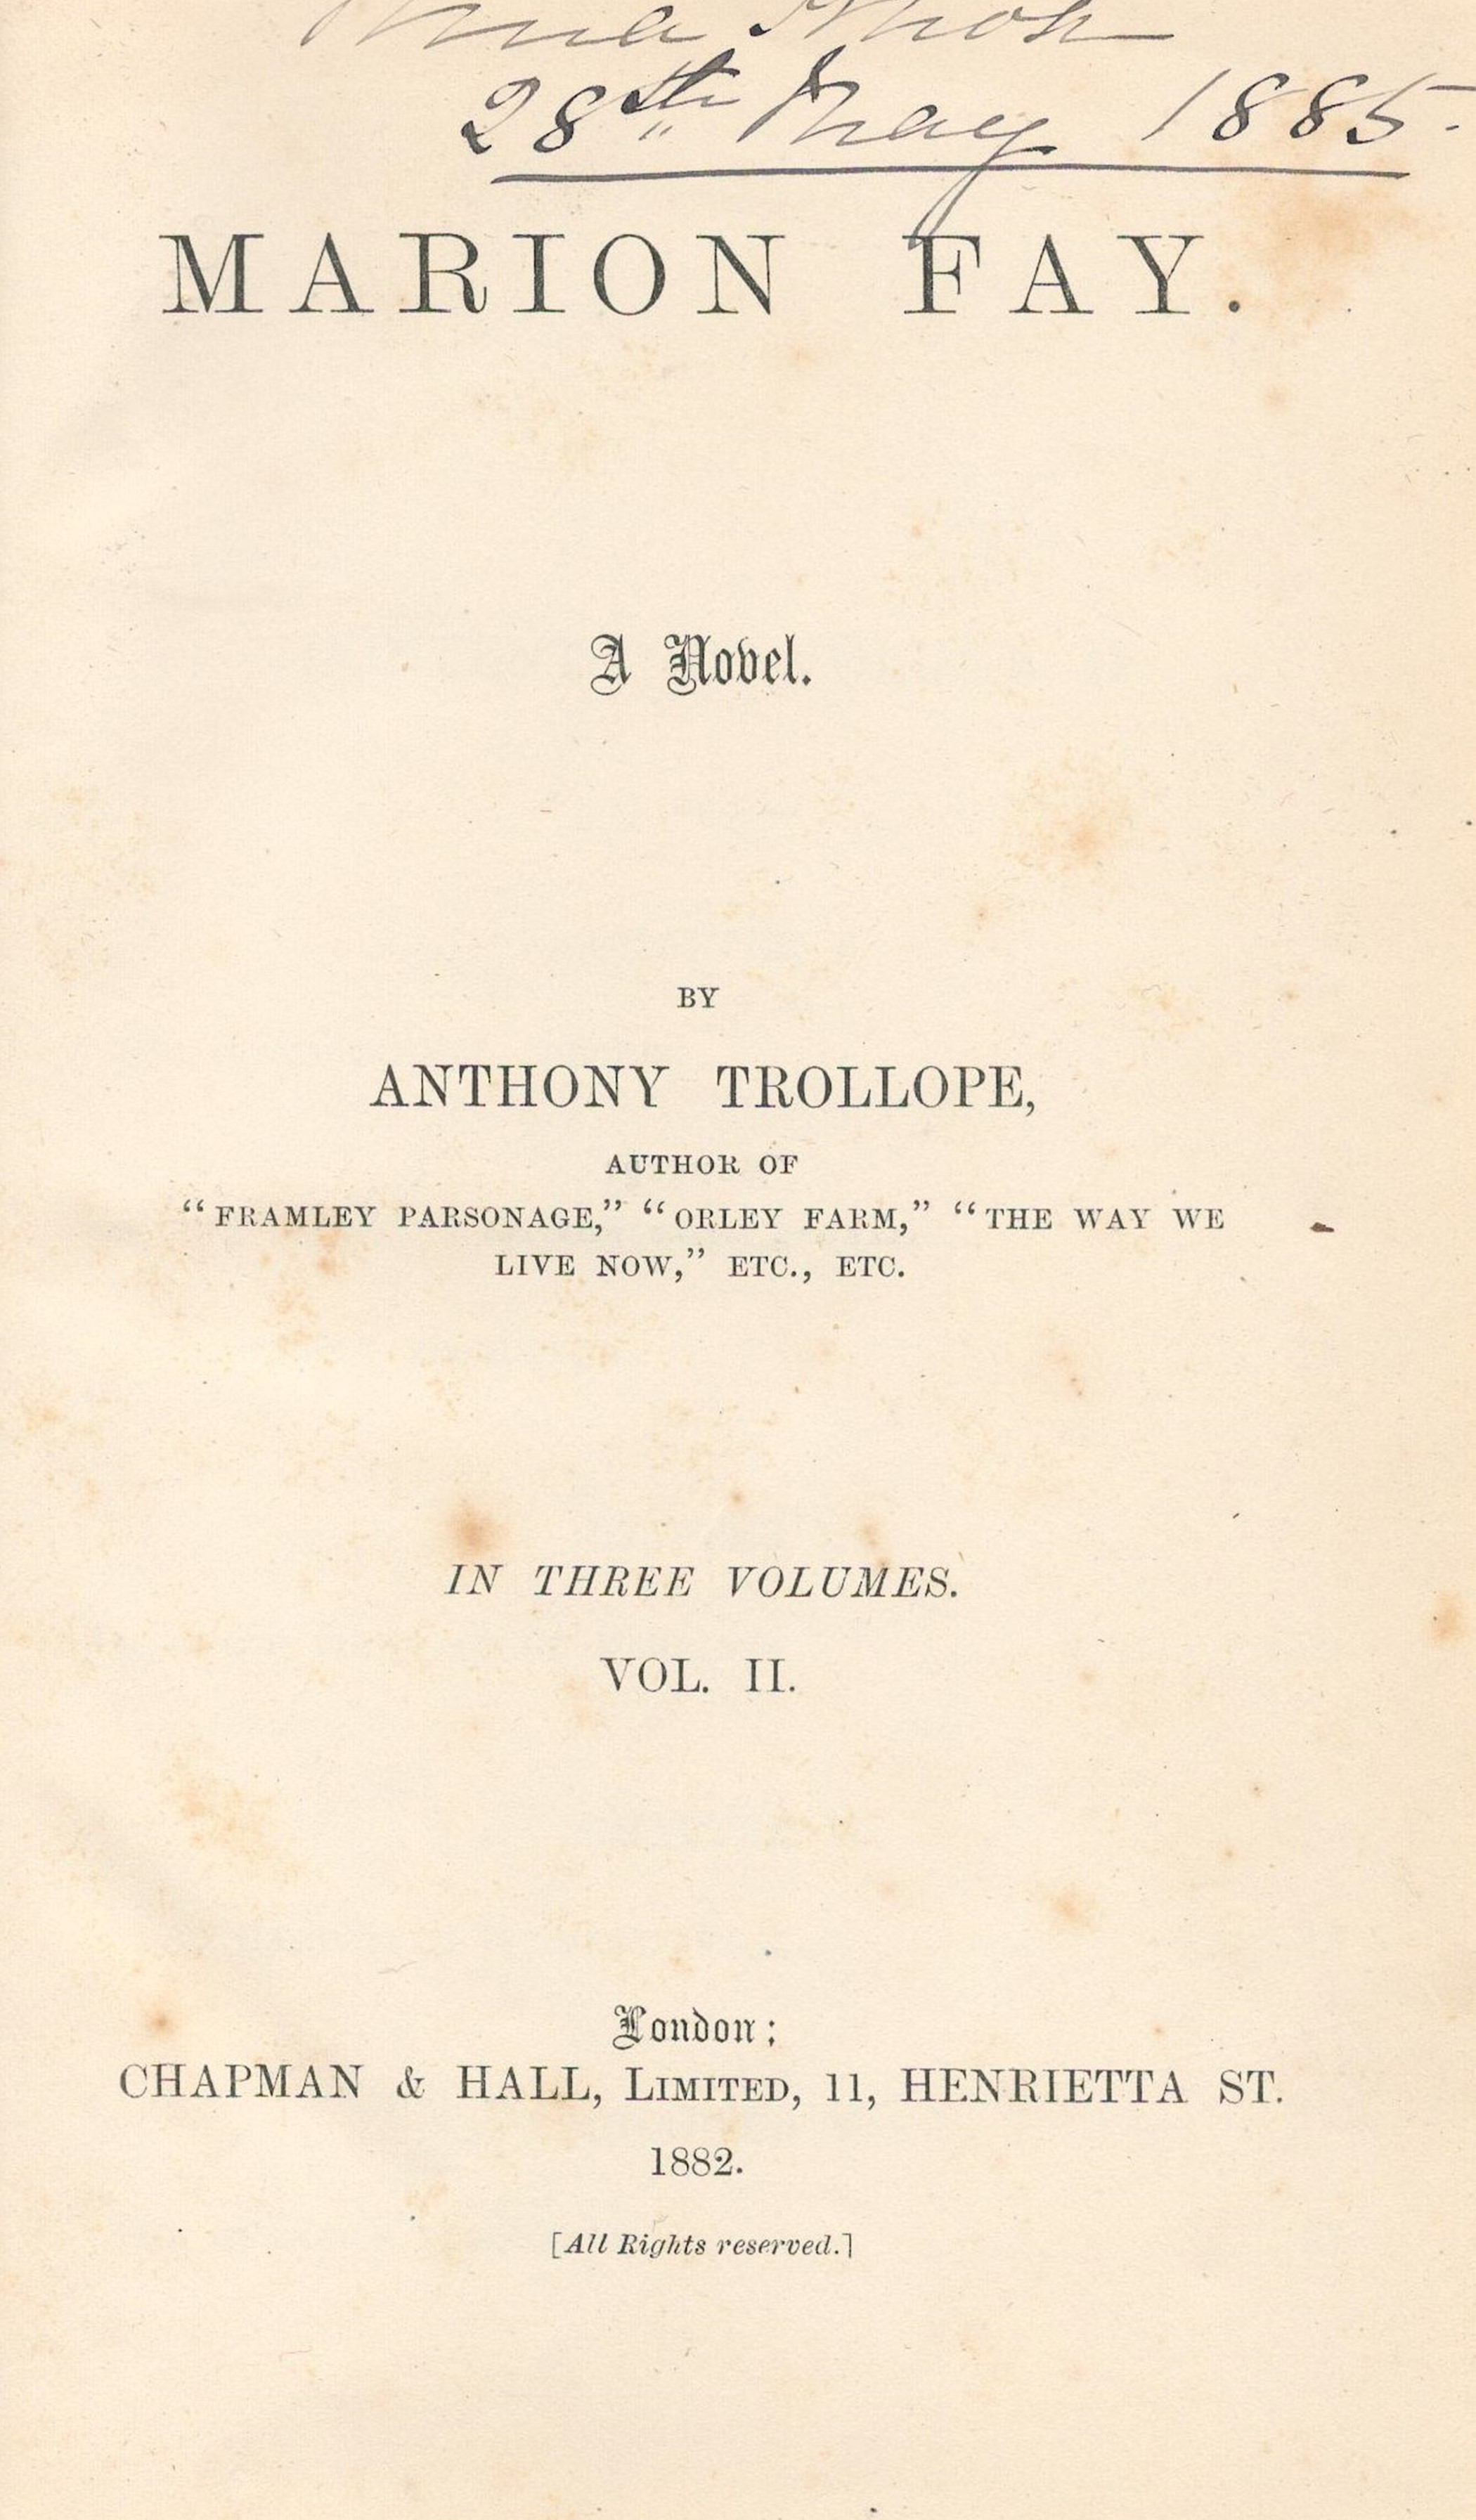 Marion Fay A Novel by Anthony Trollope vol 2 Hardback Book 1882 edition unknown published by Chapman